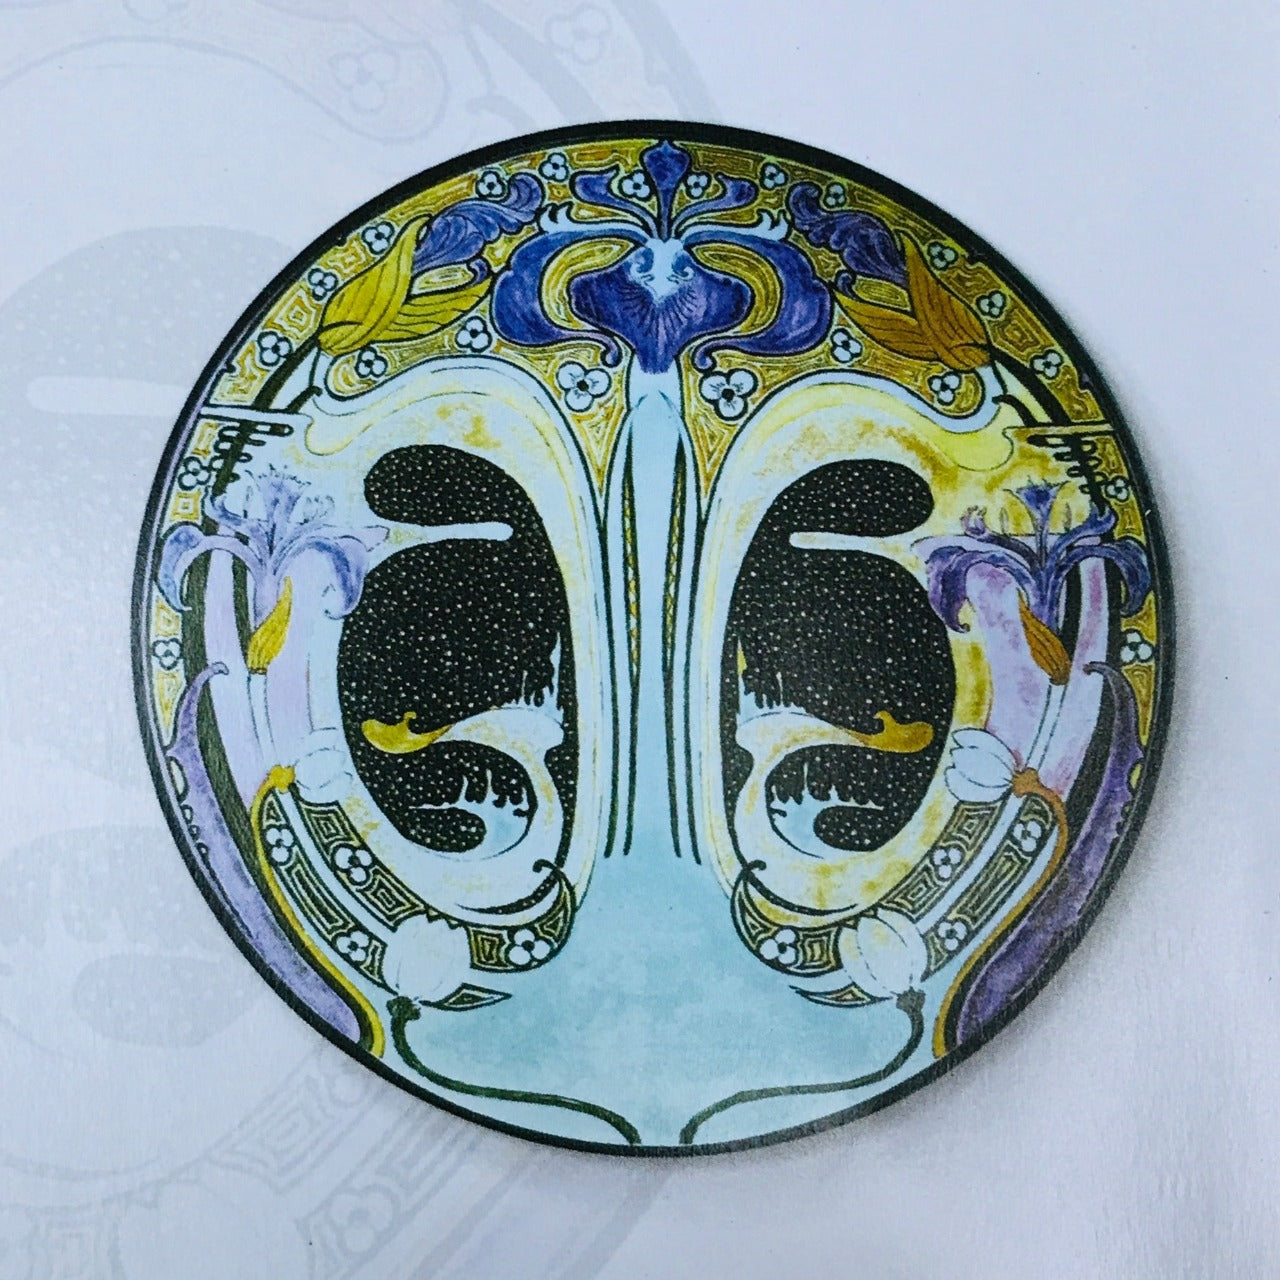 The Art Nouveau collection from Mason's includes six pieces of giftware featuring the elegant shapes and designs of this famous era. In addition, the collection also has four colourful chargers each inspired by original art nouveau designers such as Walter Crane and Tiffany.